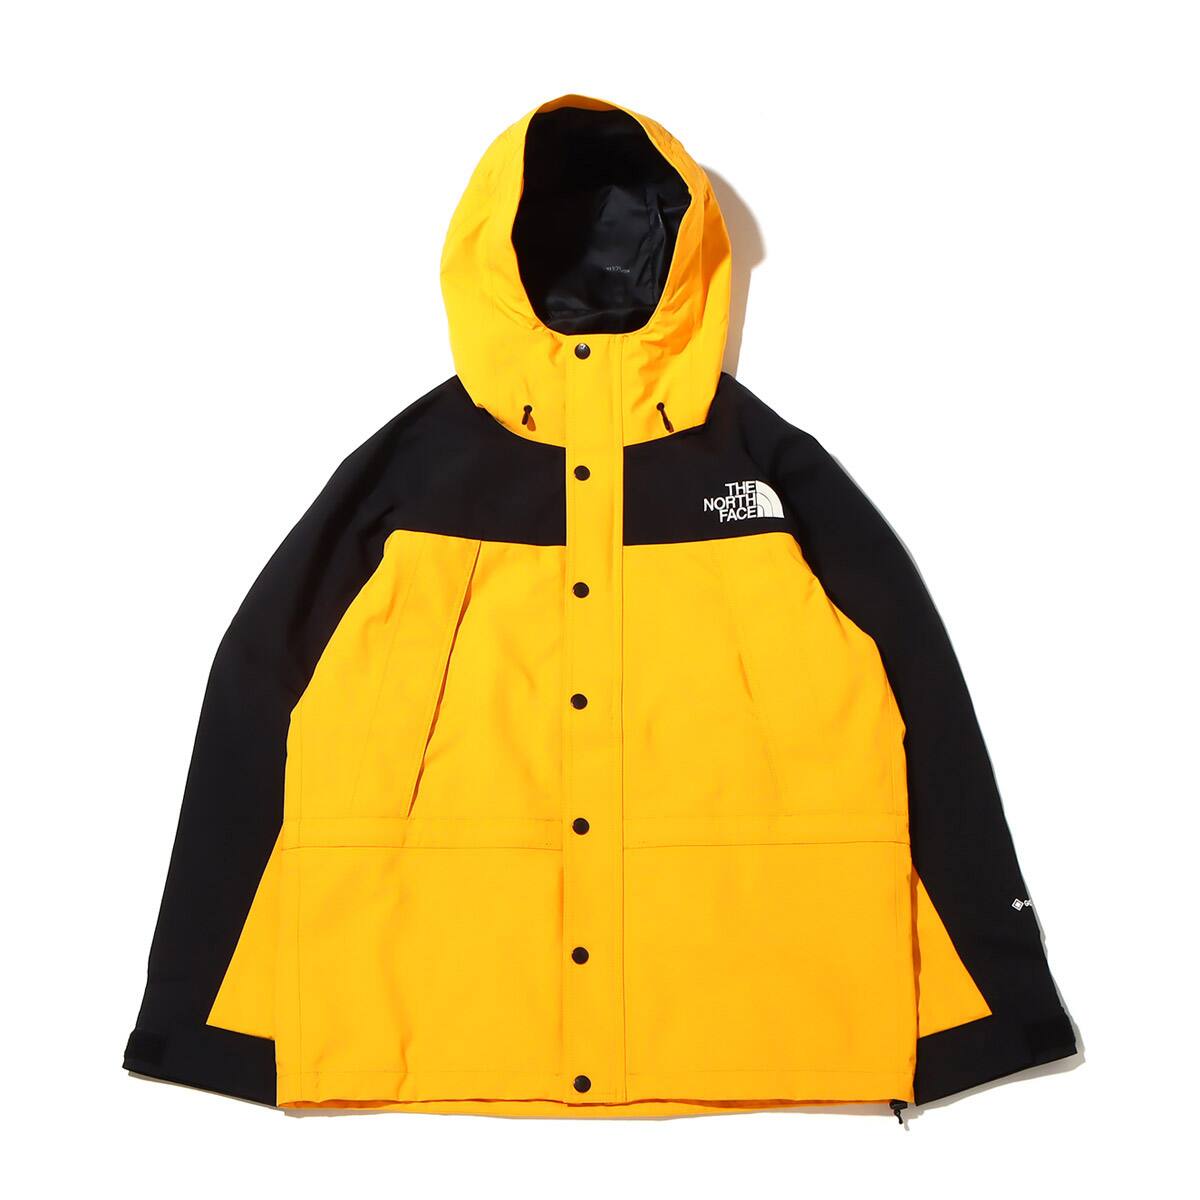 THE NORTH FACE MOUNTAIN LIGHT JACKET サミットゴールド 23SS-I